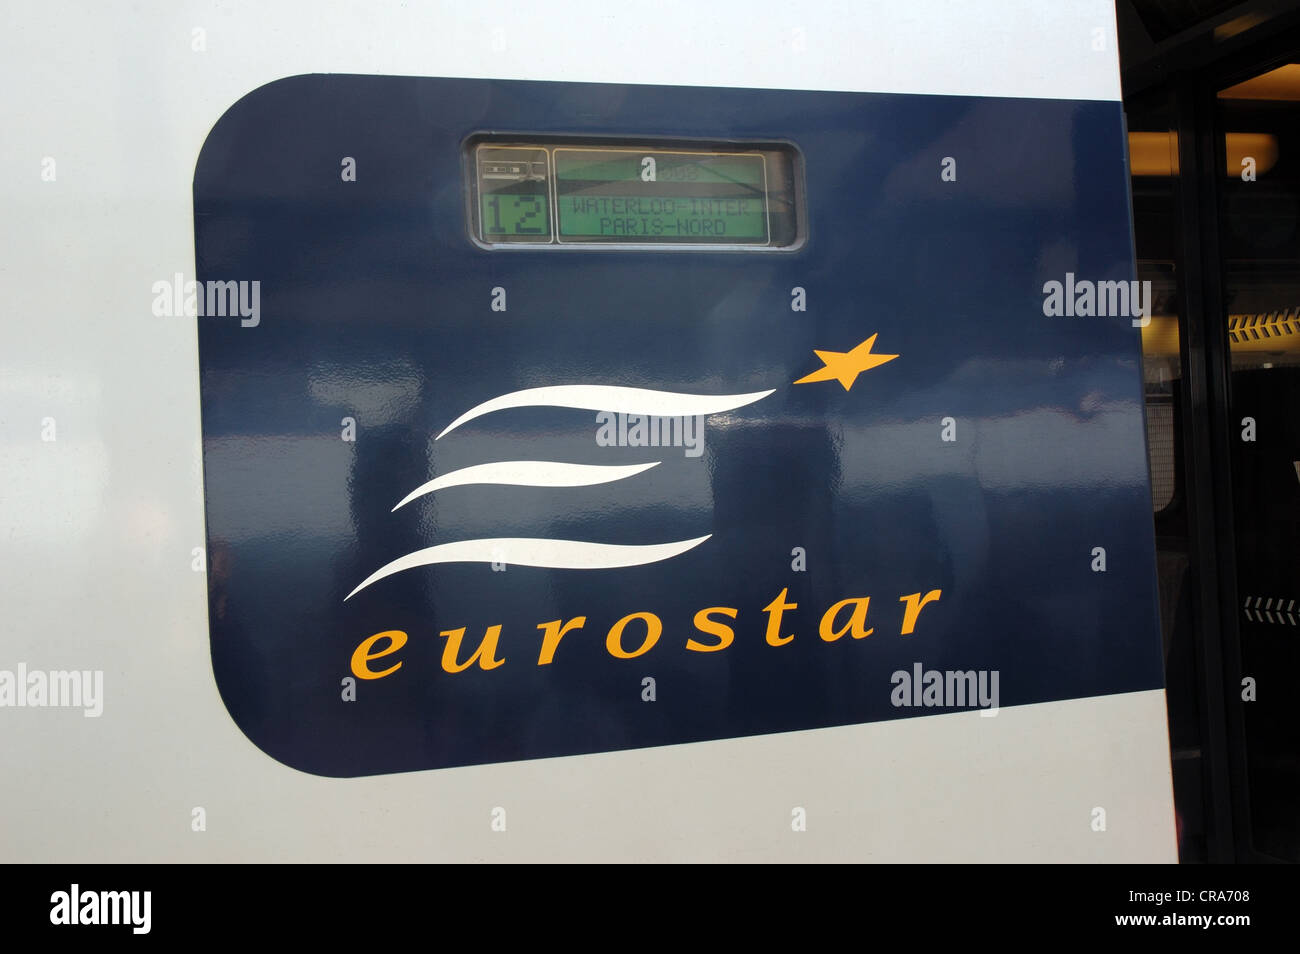 Carriage door of Eurostar train at Waterloo, London, bound for Paris-Nord. Stock Photo